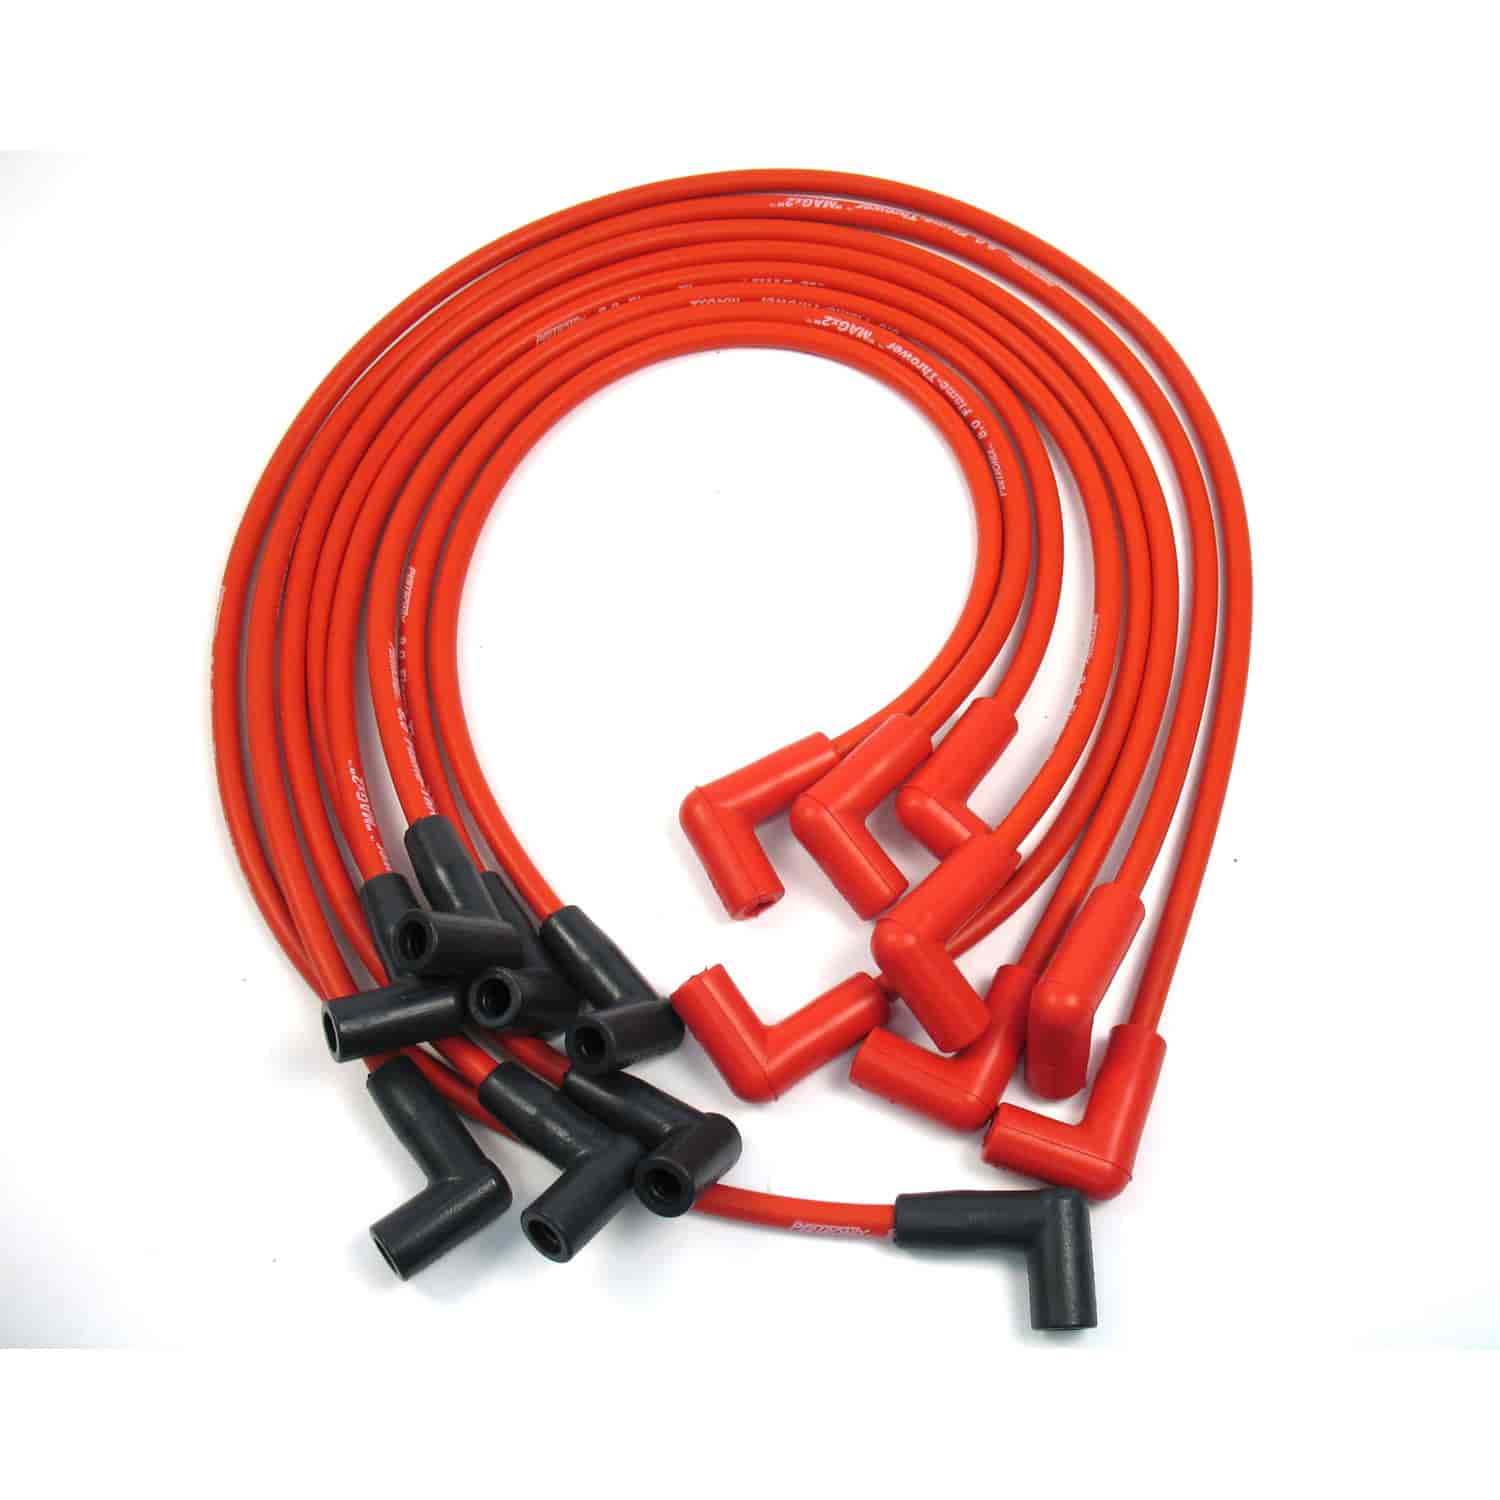 Flame-Thrower 8mm MAGx2 Spark Plug Wires 1974-89 Small Block Chevy